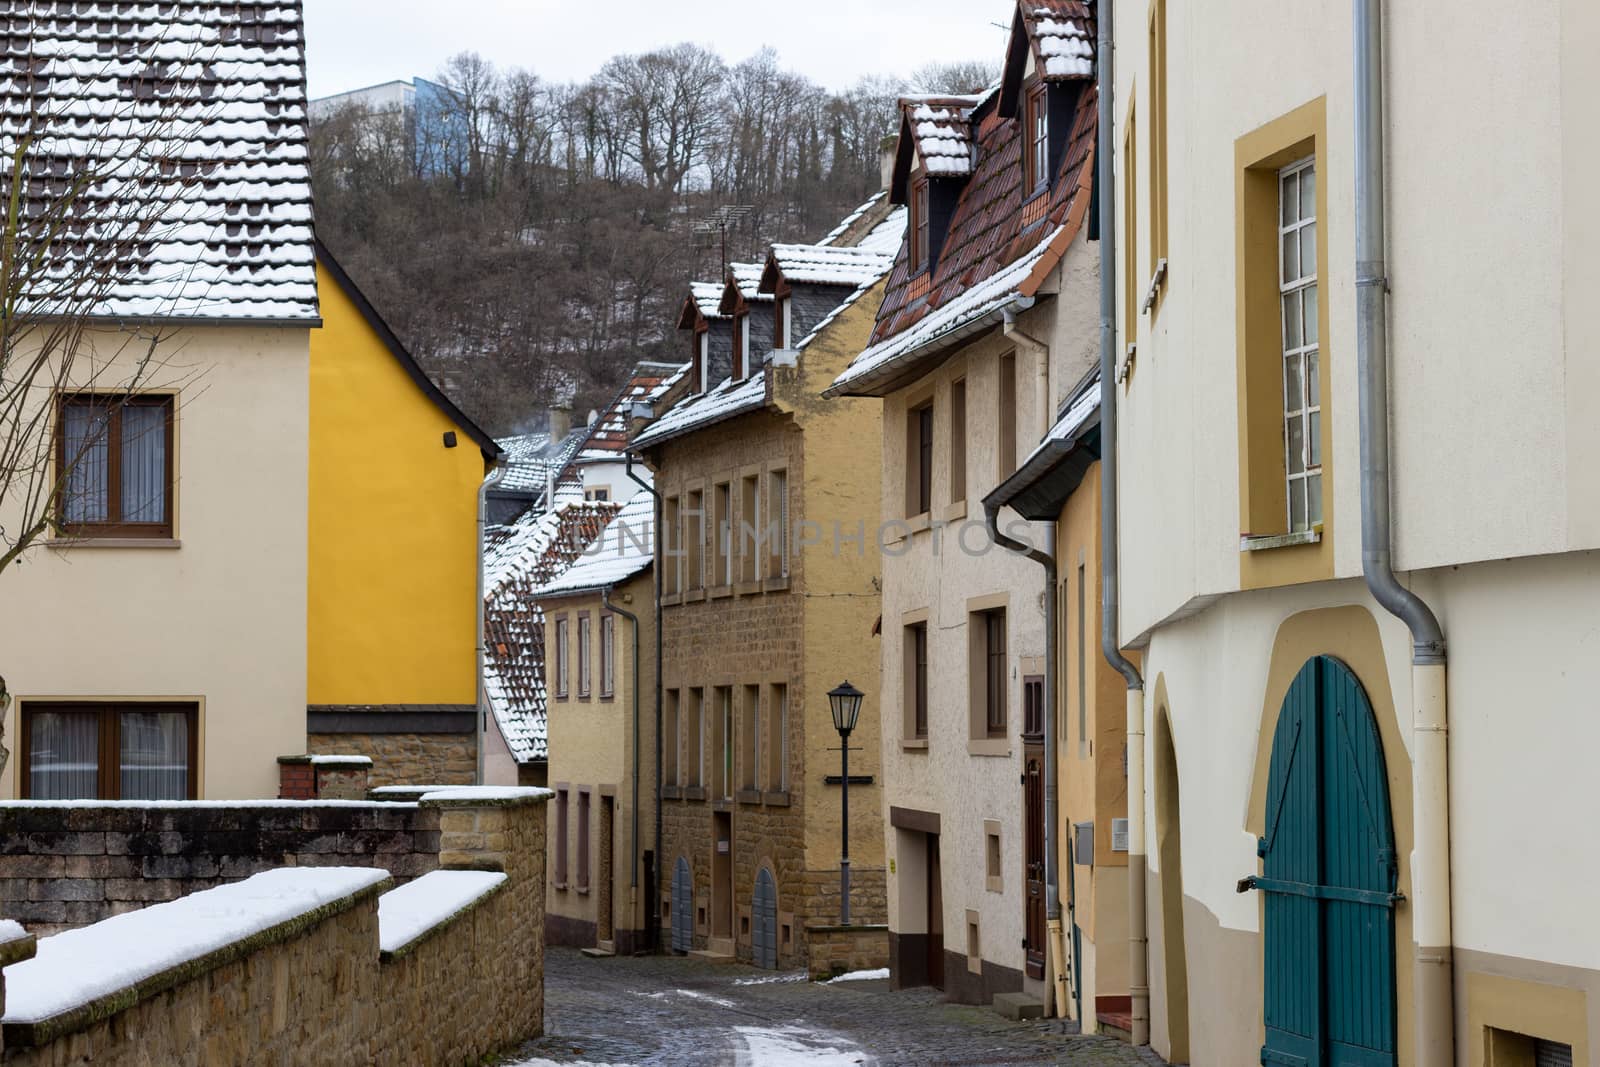 Cobbled narrow alley in the historic old town of Meisenheim by reinerc